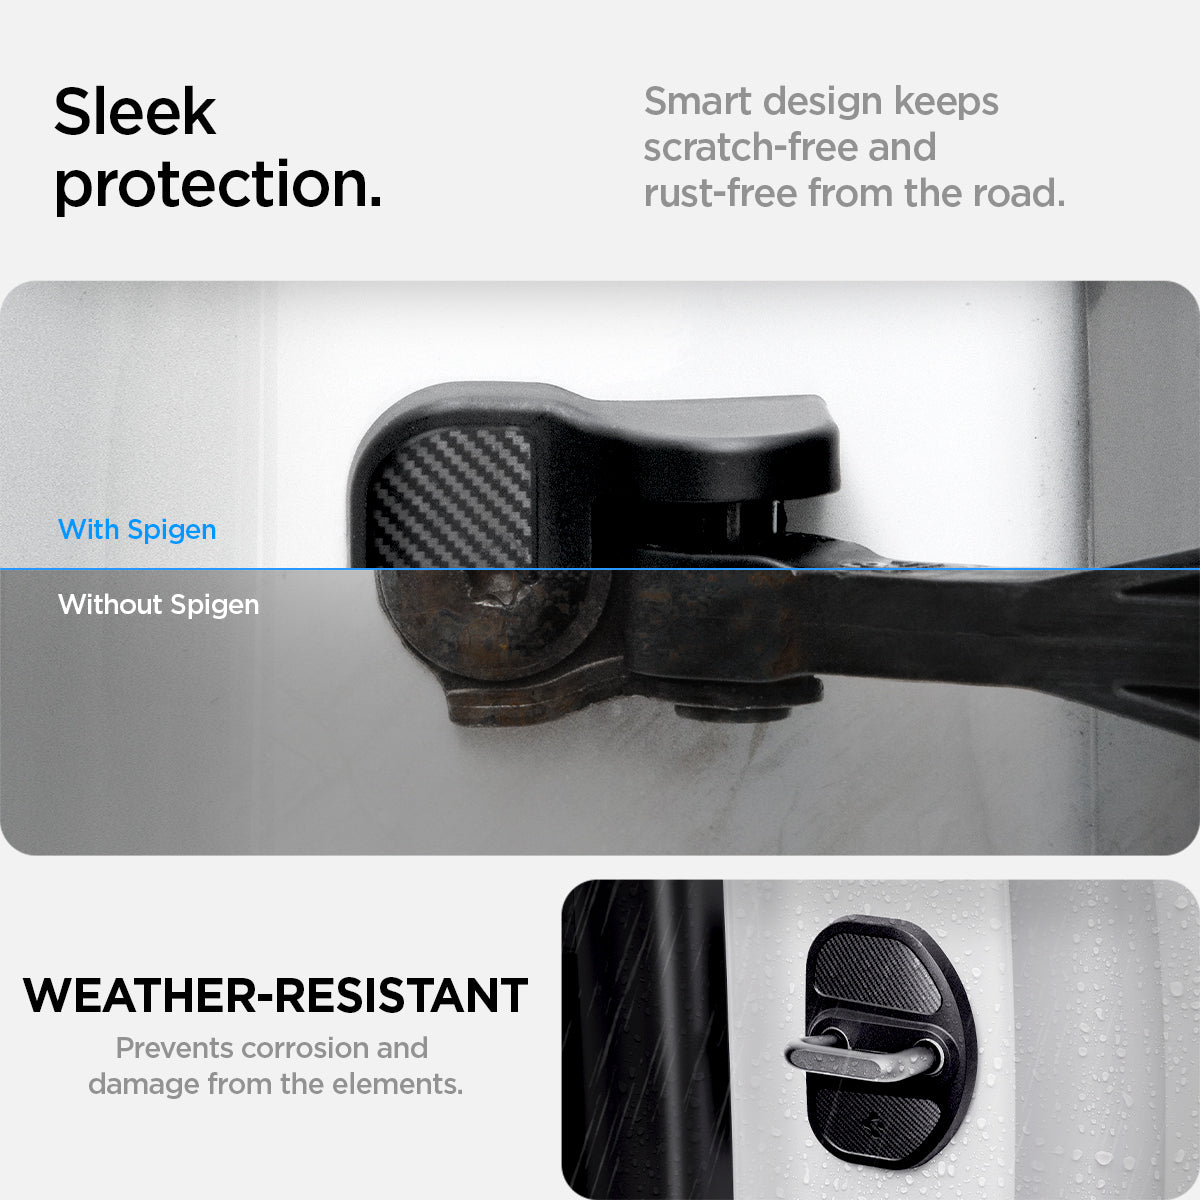 ACP07123 - Tesla Model Y & 3 Door Lock Cover TO320 in Black showing the sleek protection. Smart design keeps scratch-free and rust-free from the road. showing comparison between other brands vs spigen brand also a weather-resistant, prevents corrosion and damage from the elements